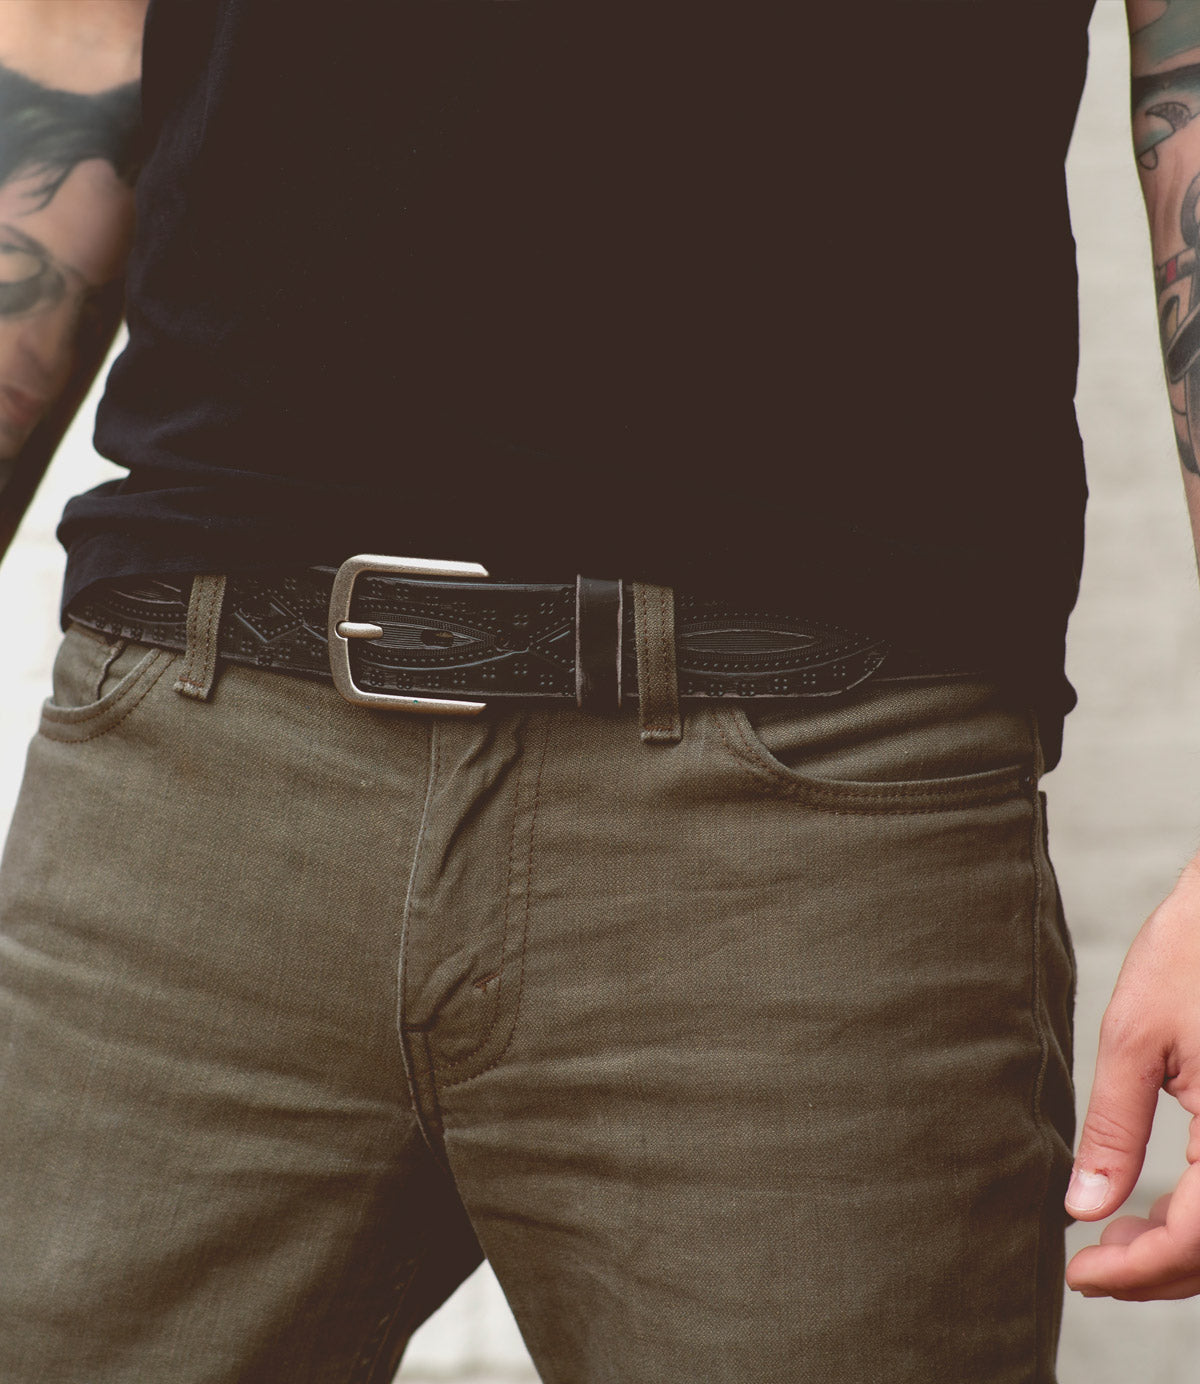 Man wearing a black shirt, dark jeans, and a Bed Stu Arsenal belt with a metal buckle adorned with western diamond details, and tattoos visible on his arms.